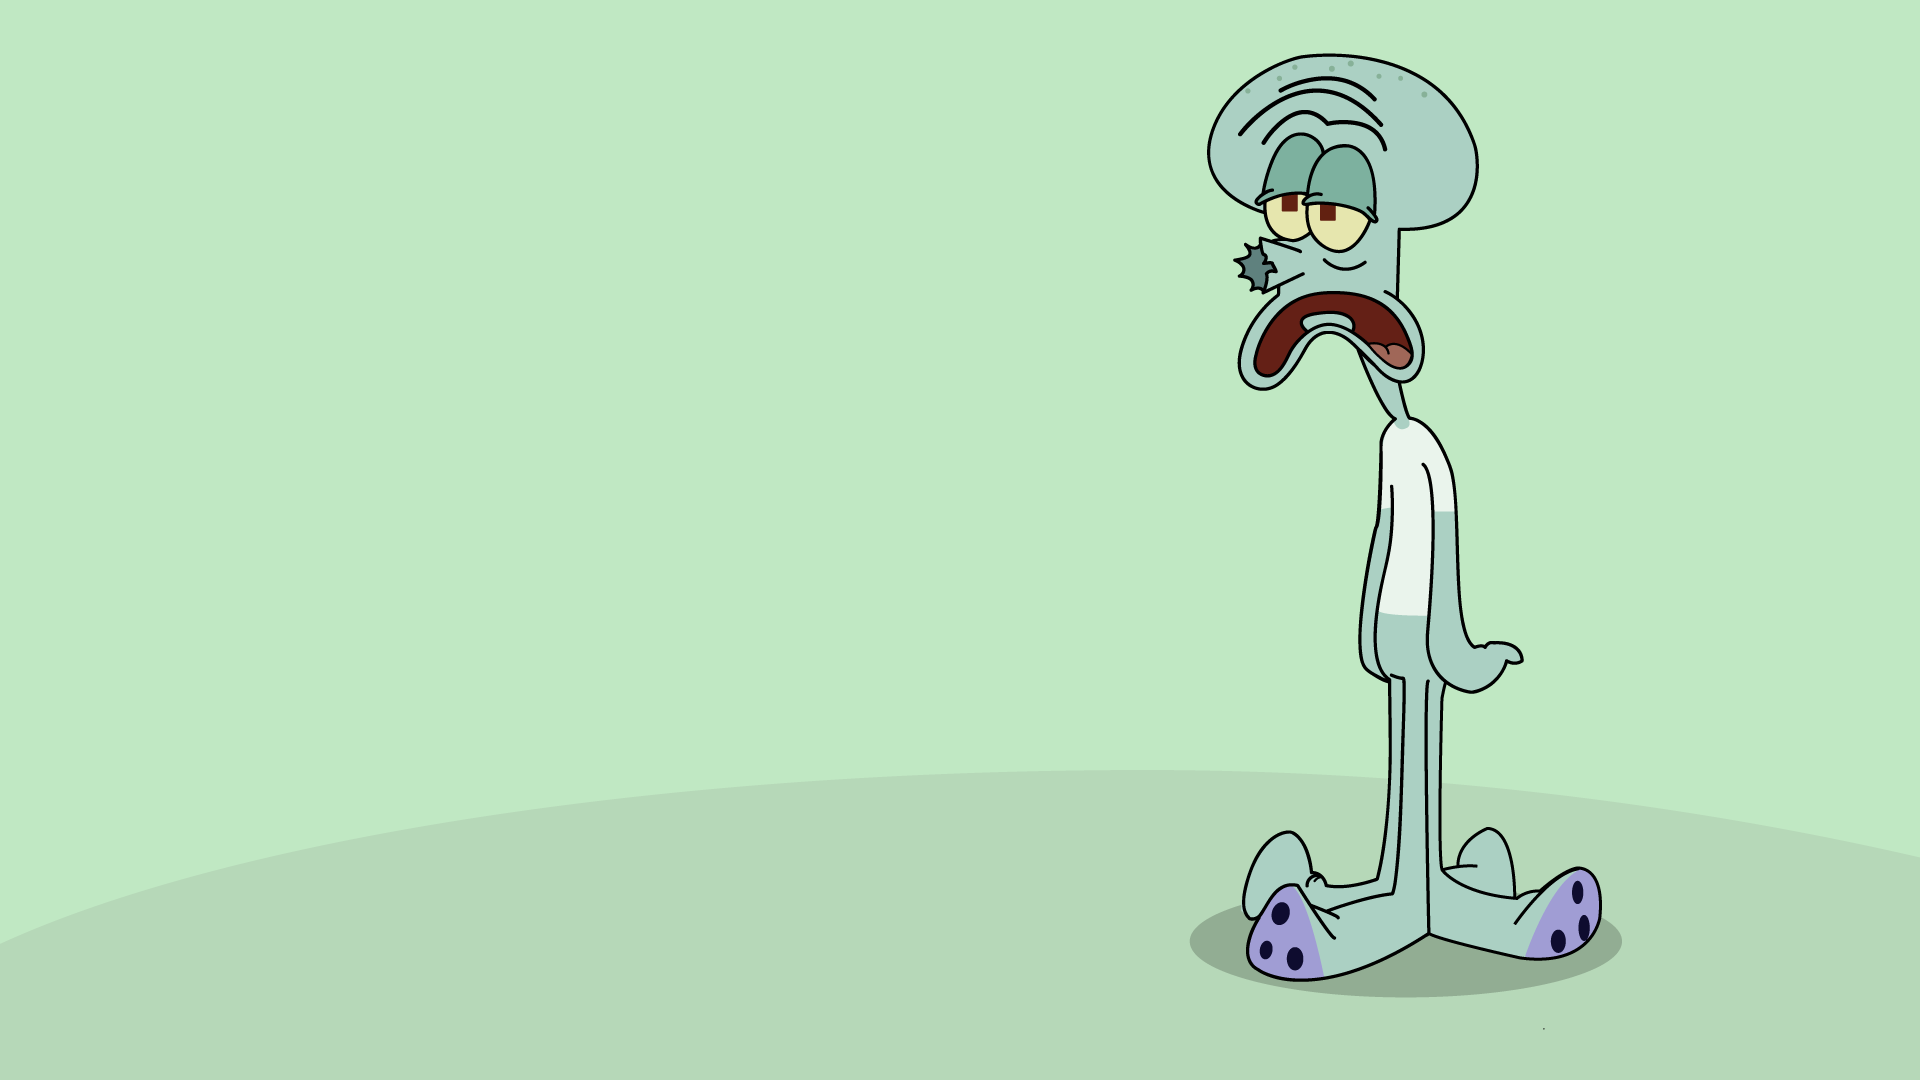 I Made This Squidward Wallpaper, What Do You Guys Think - Squidward Wallpaper Hd , HD Wallpaper & Backgrounds